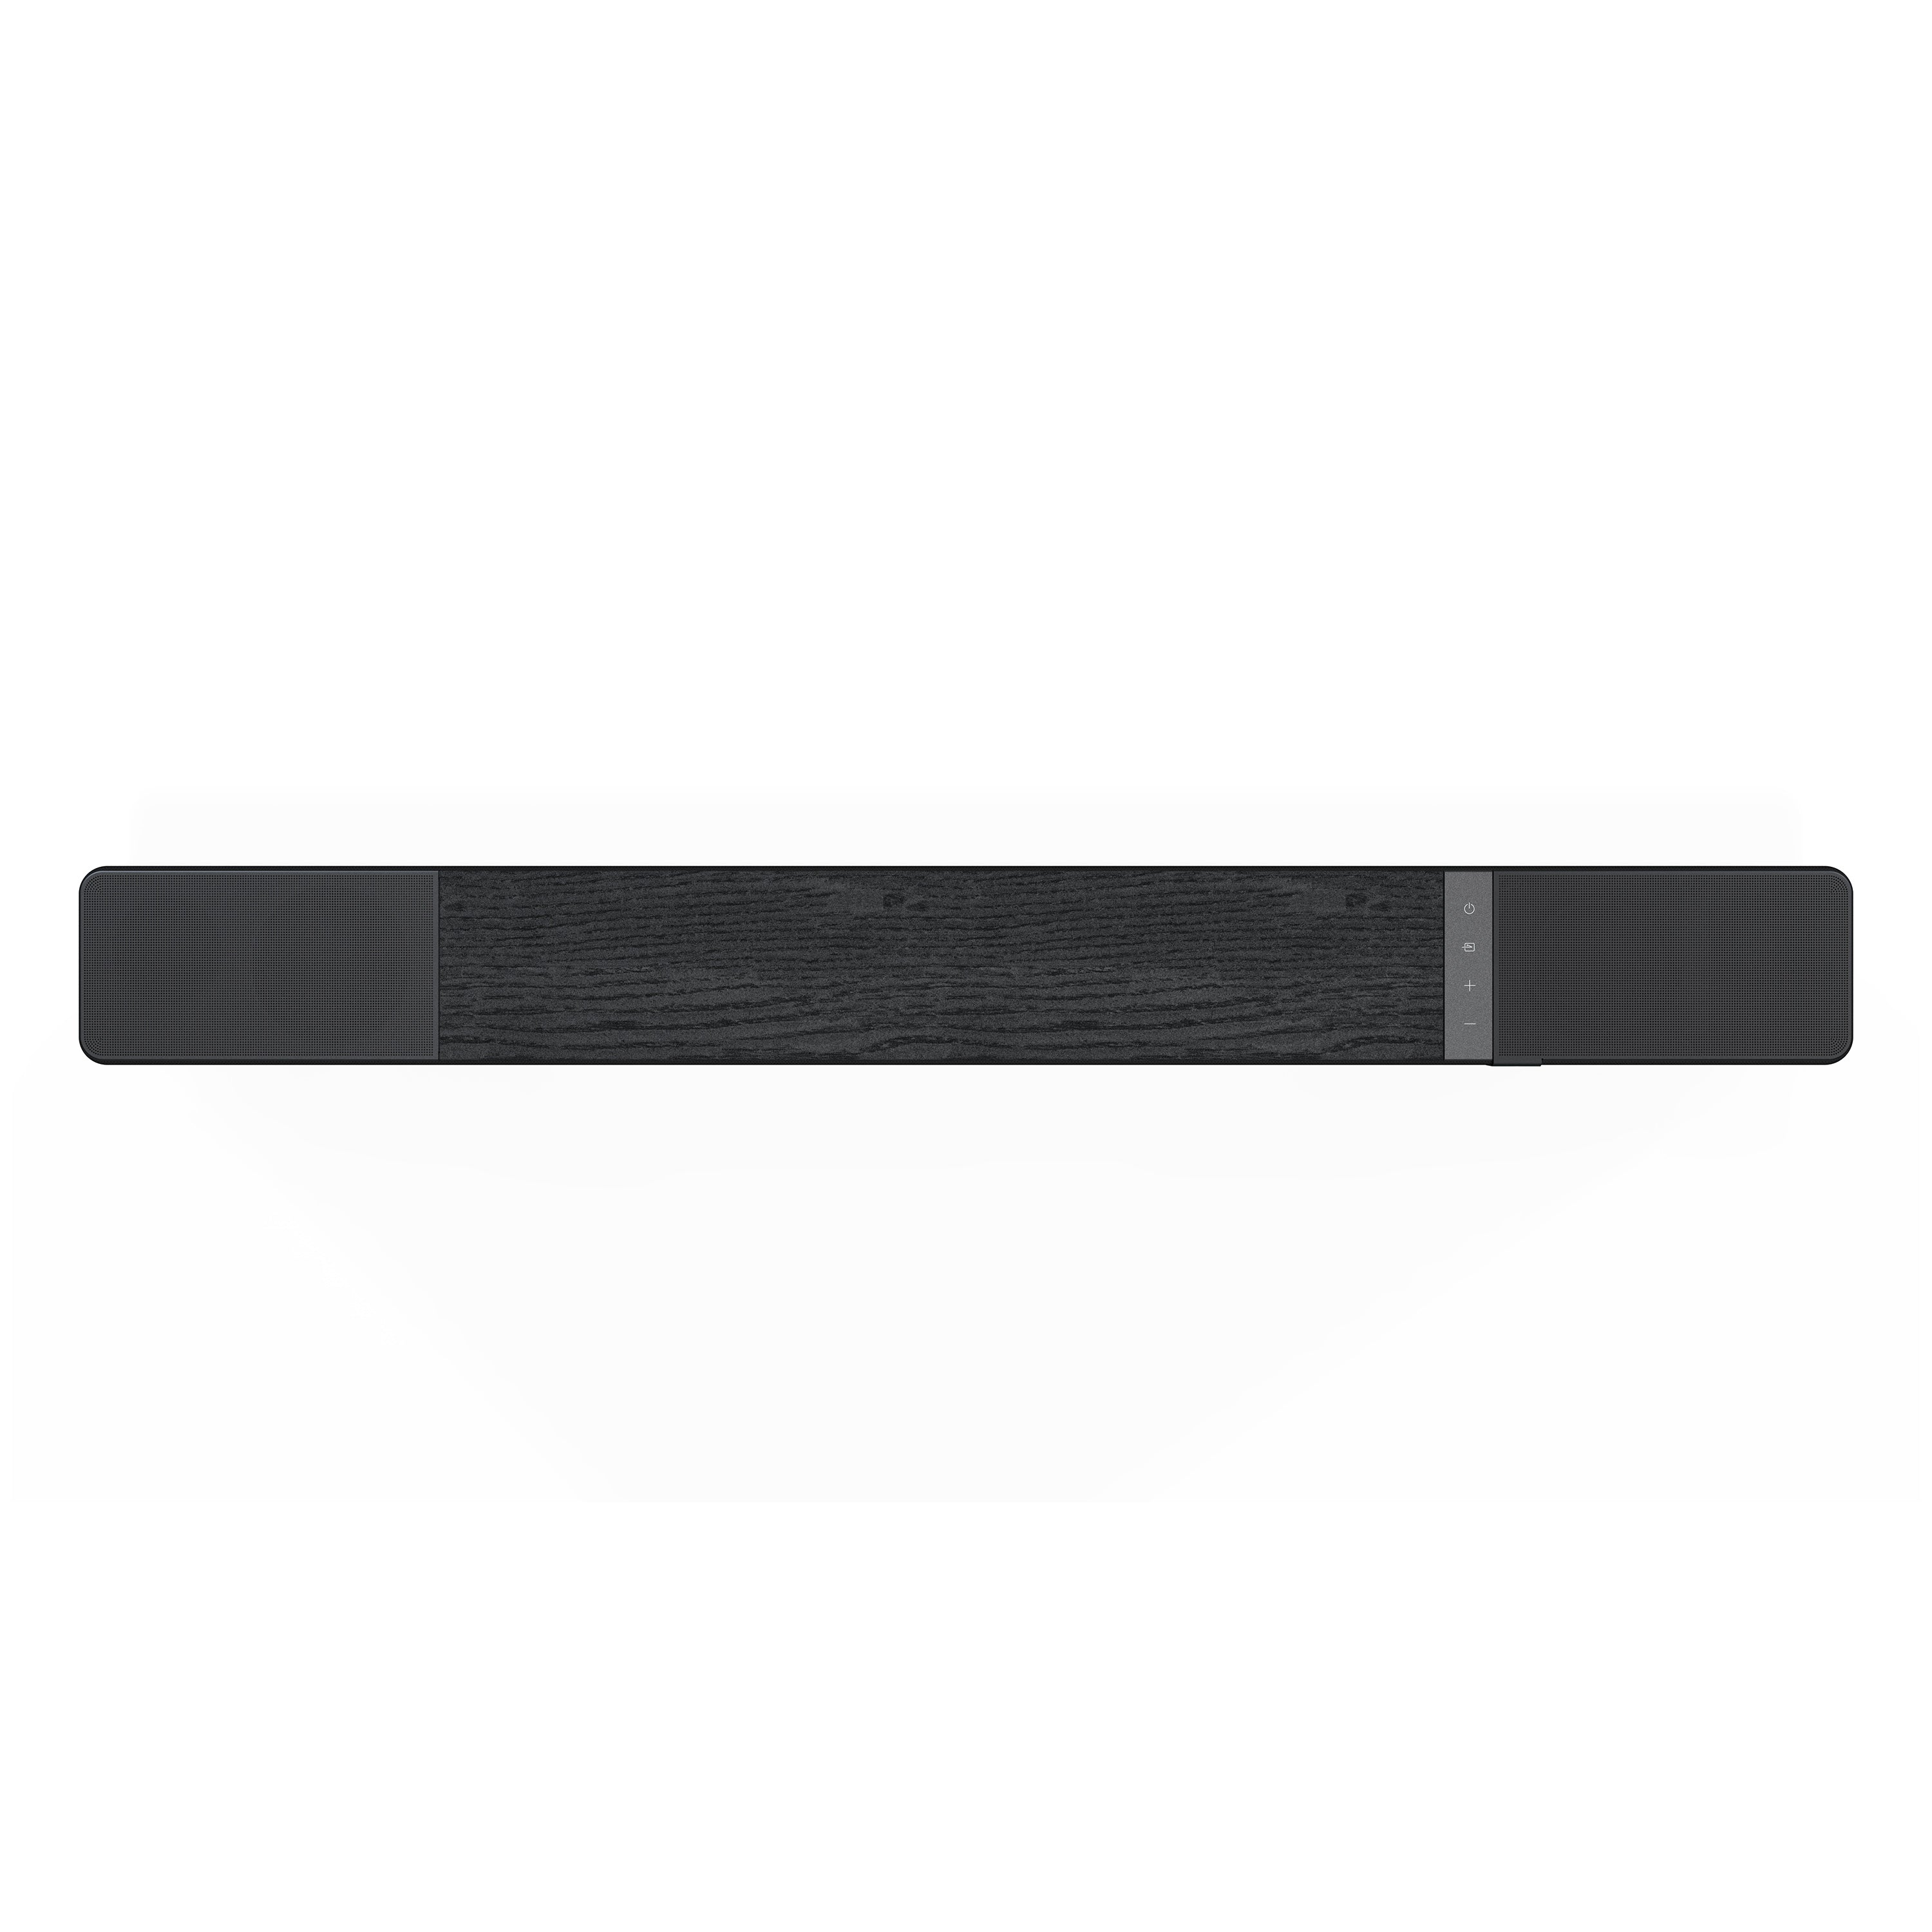 Flexus Core 200 Dolby Atmos Sound Bar with Elevation Speakers